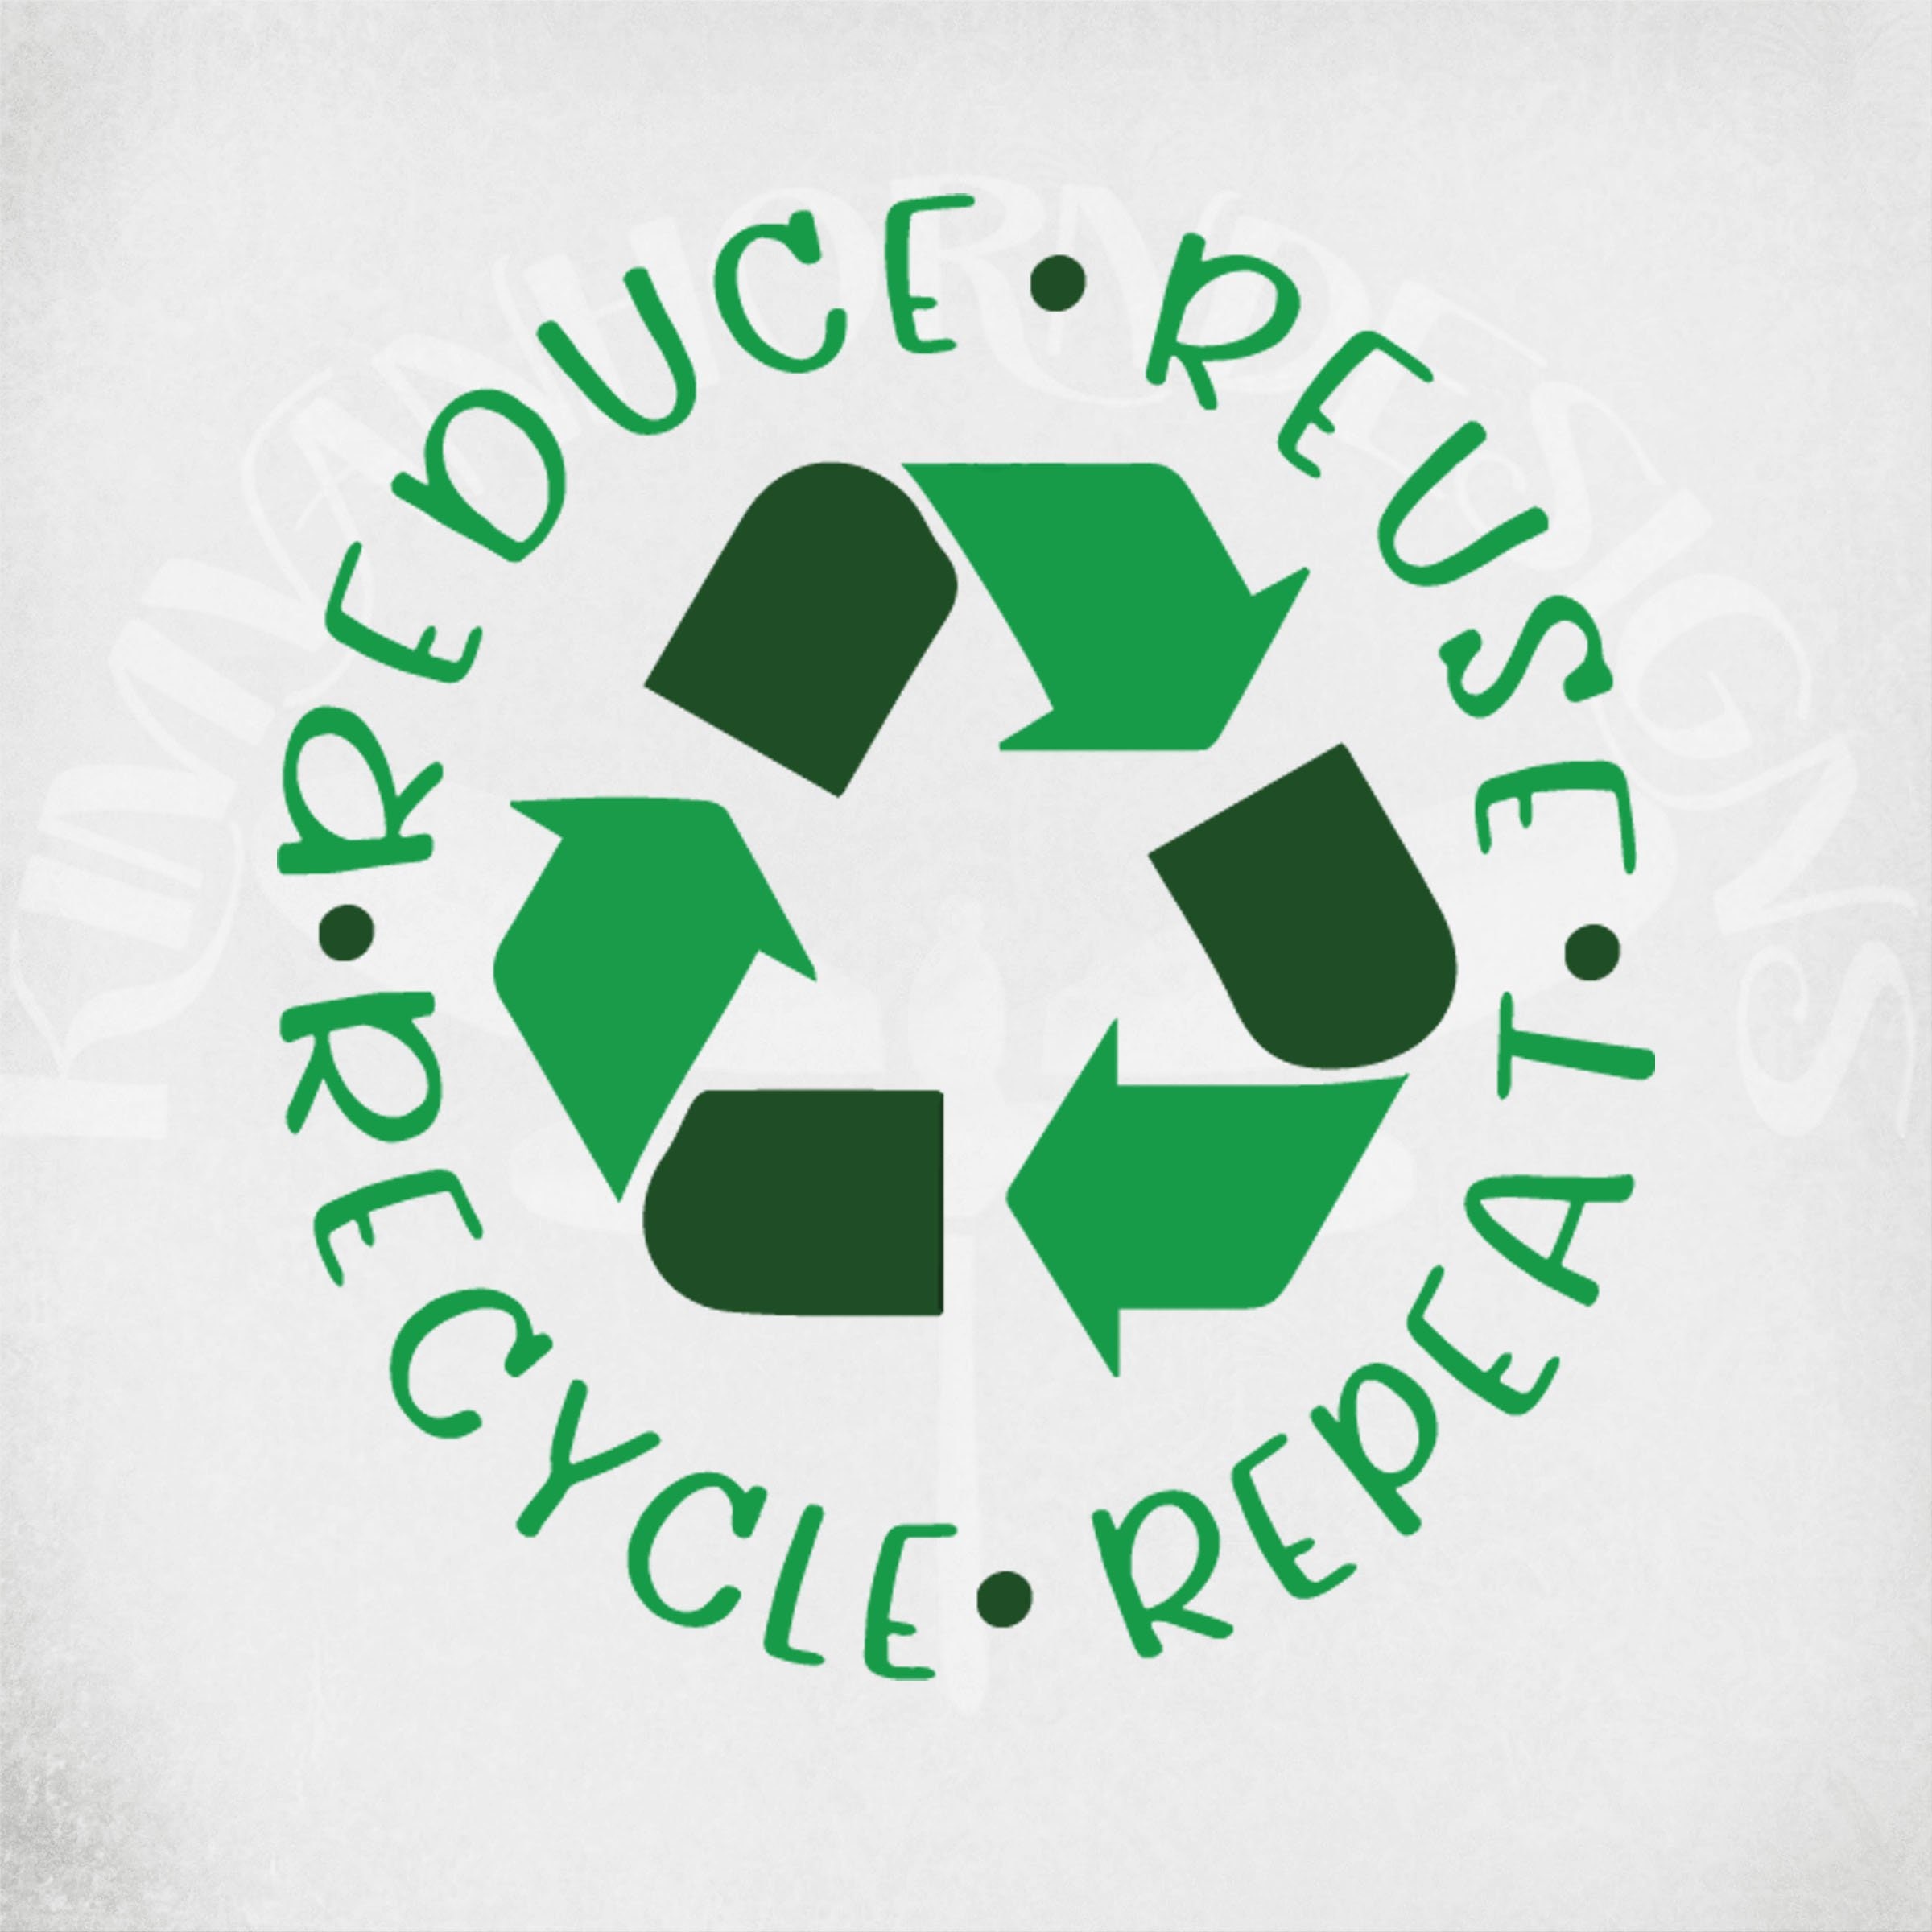 Reduce Reuse Recycle Logo